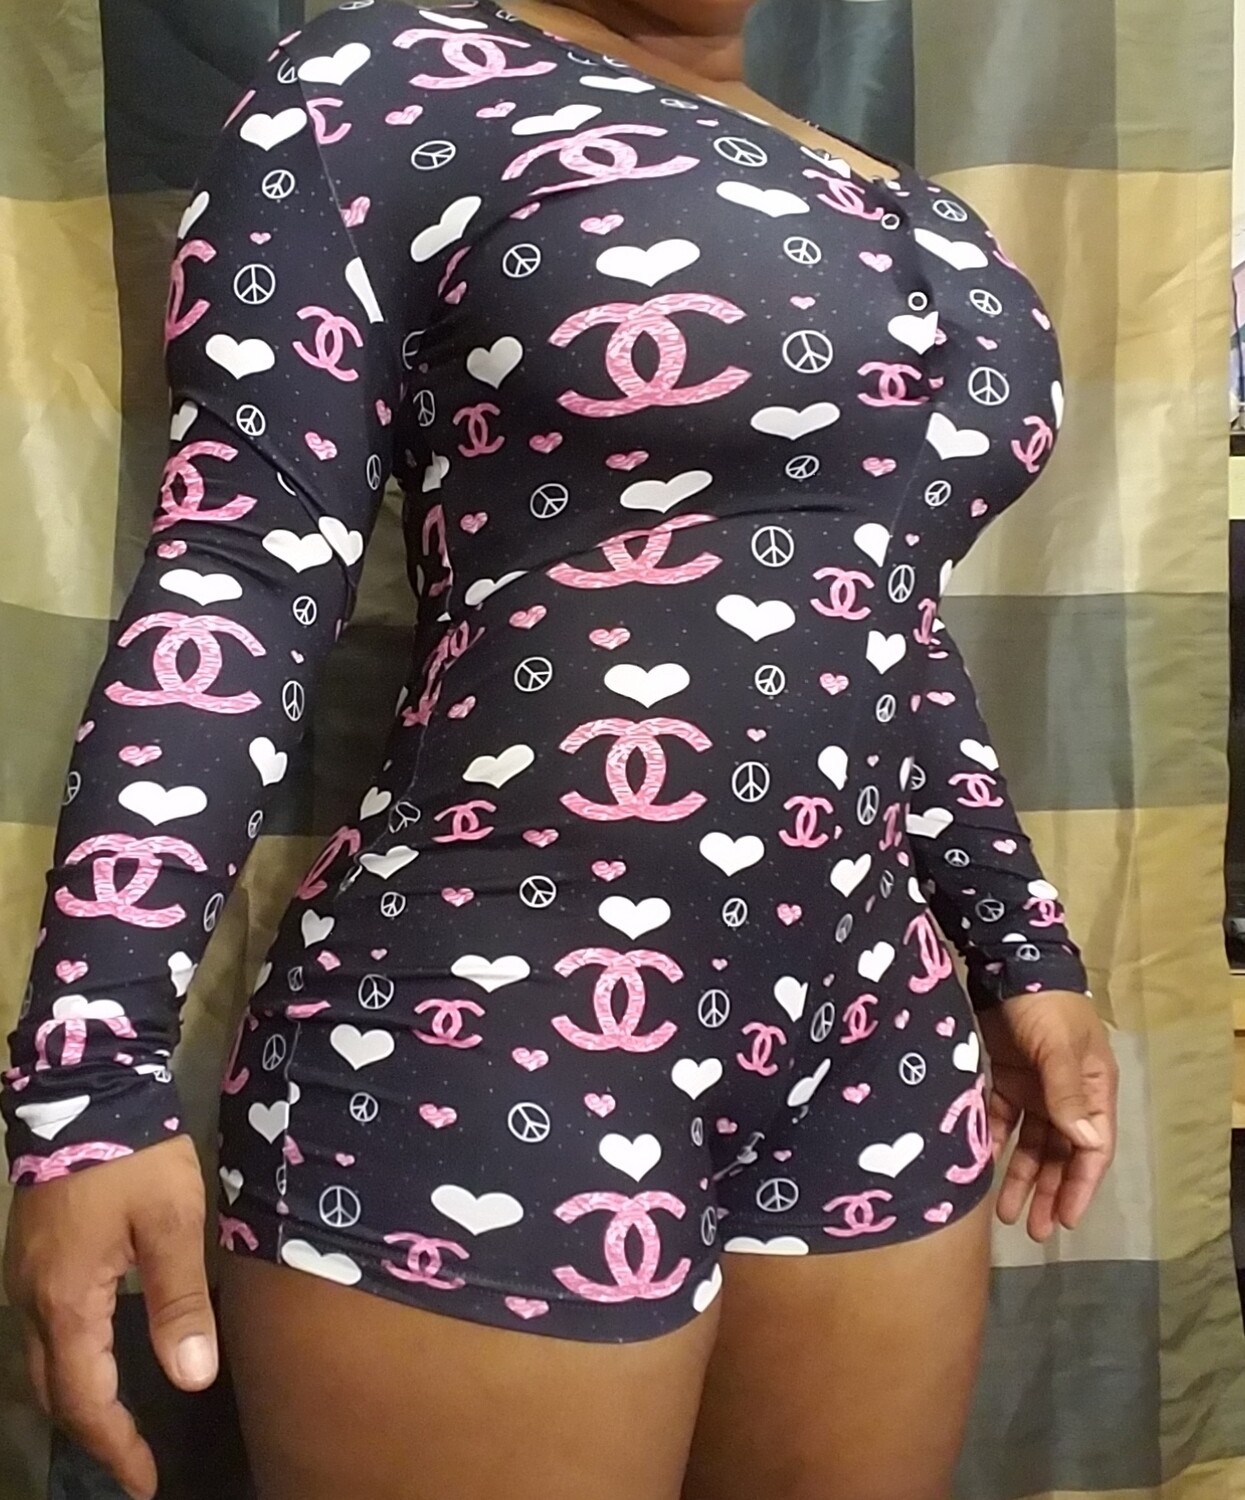 Women's Long Sleeve Shorts Playsuit, Casual, Party, Onesie Pajama Wear